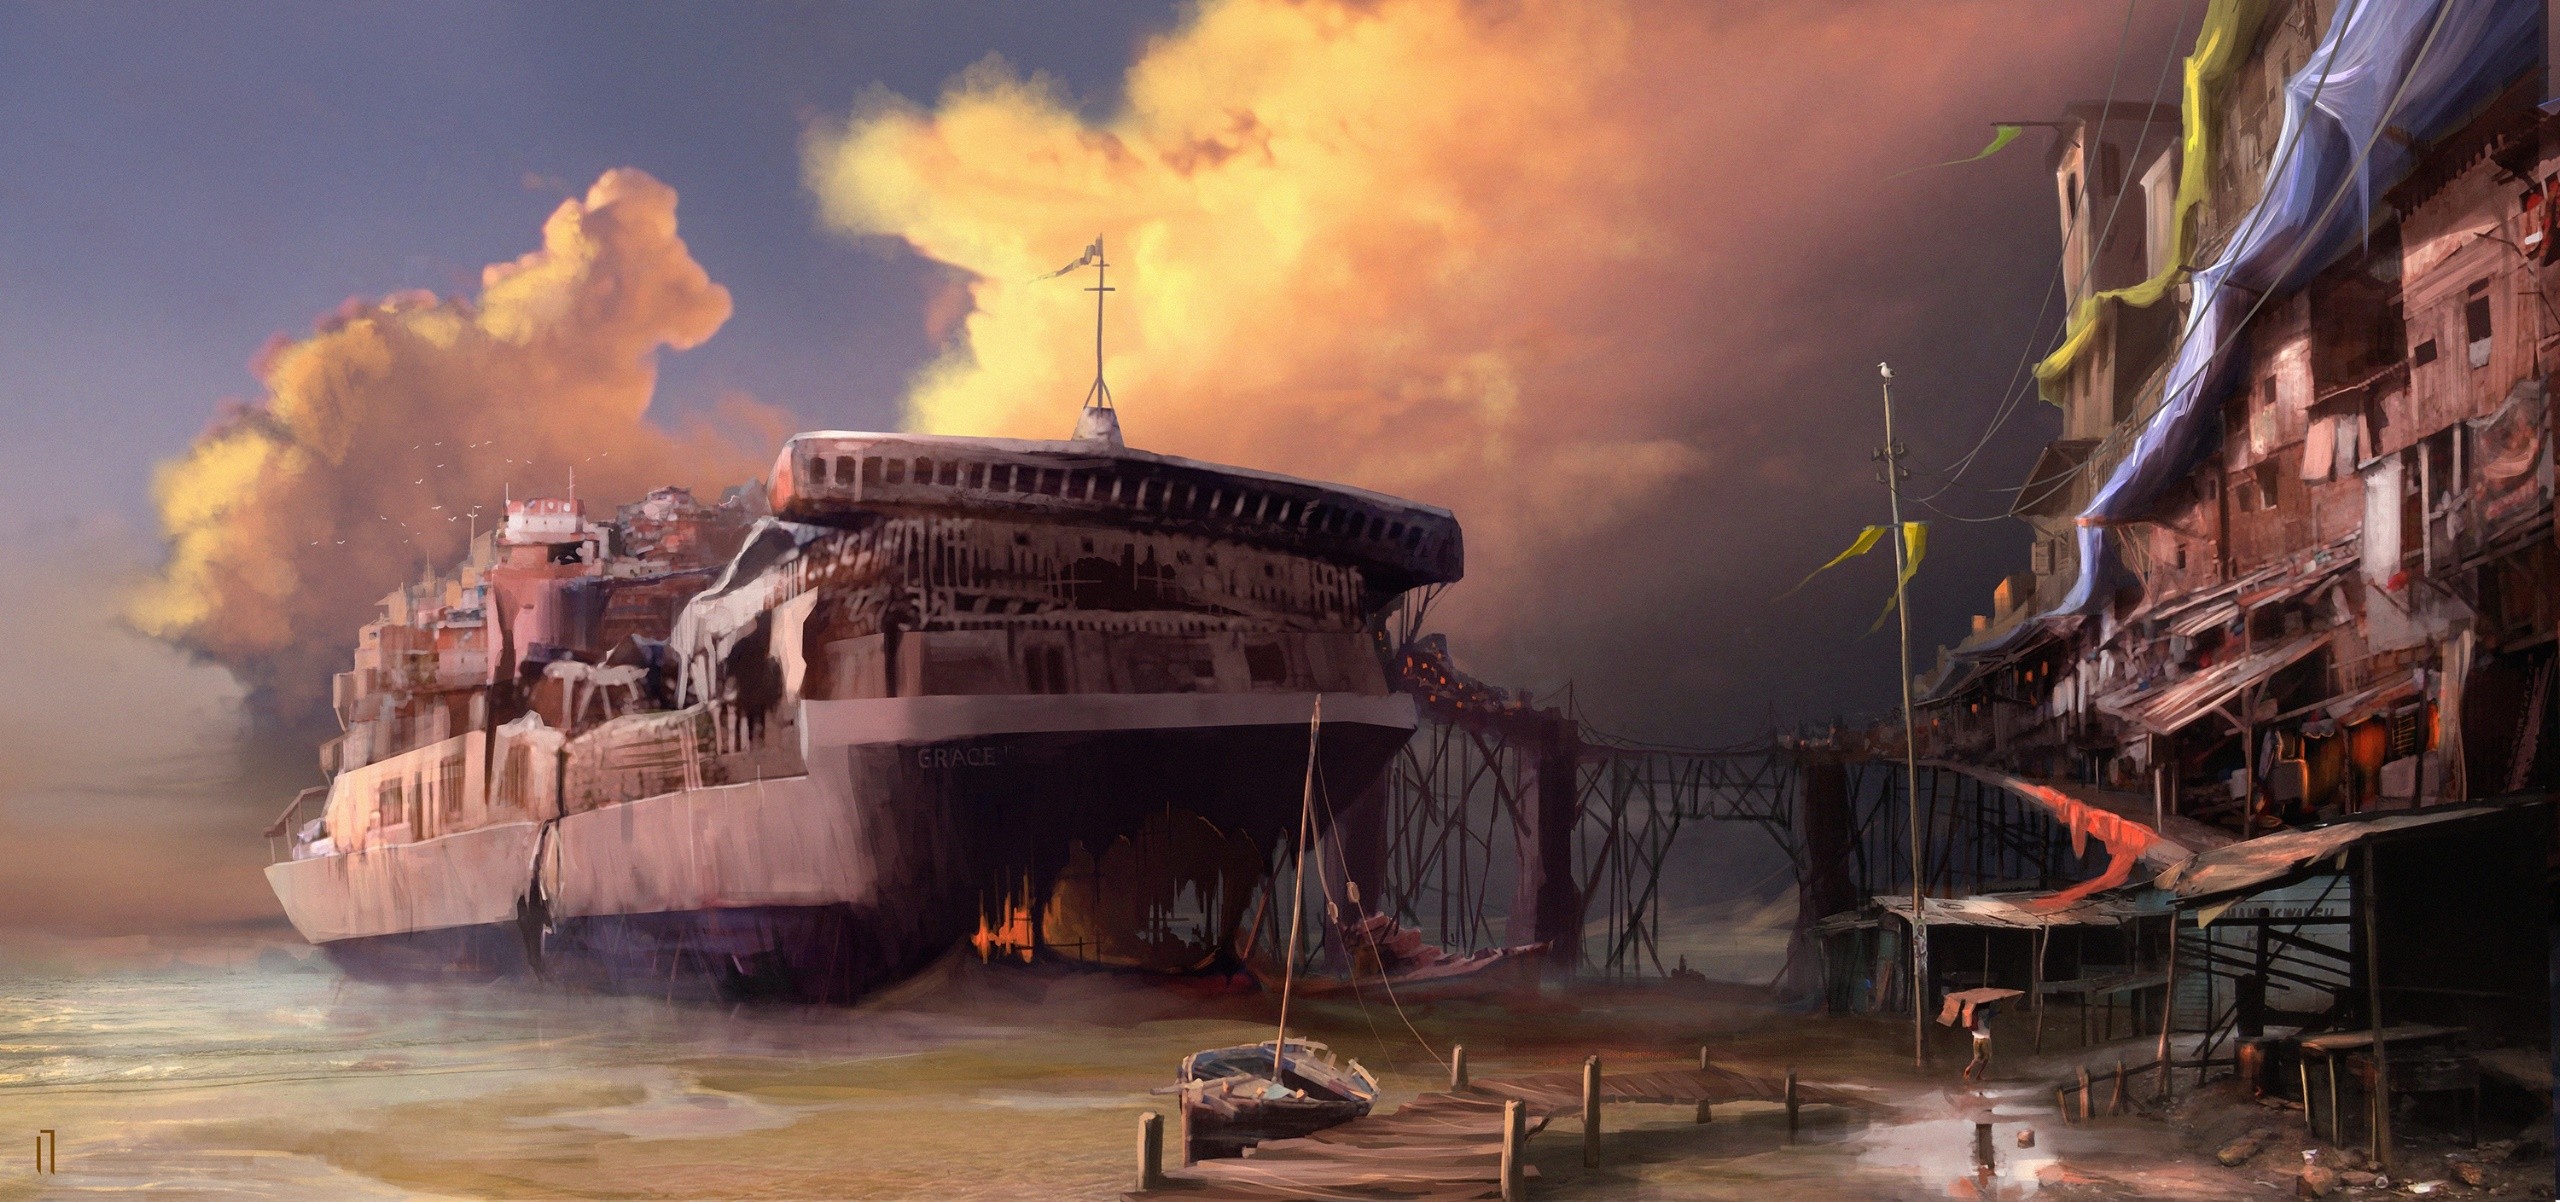 General 2560x1202 apocalyptic artwork ship shipwreck clouds boat